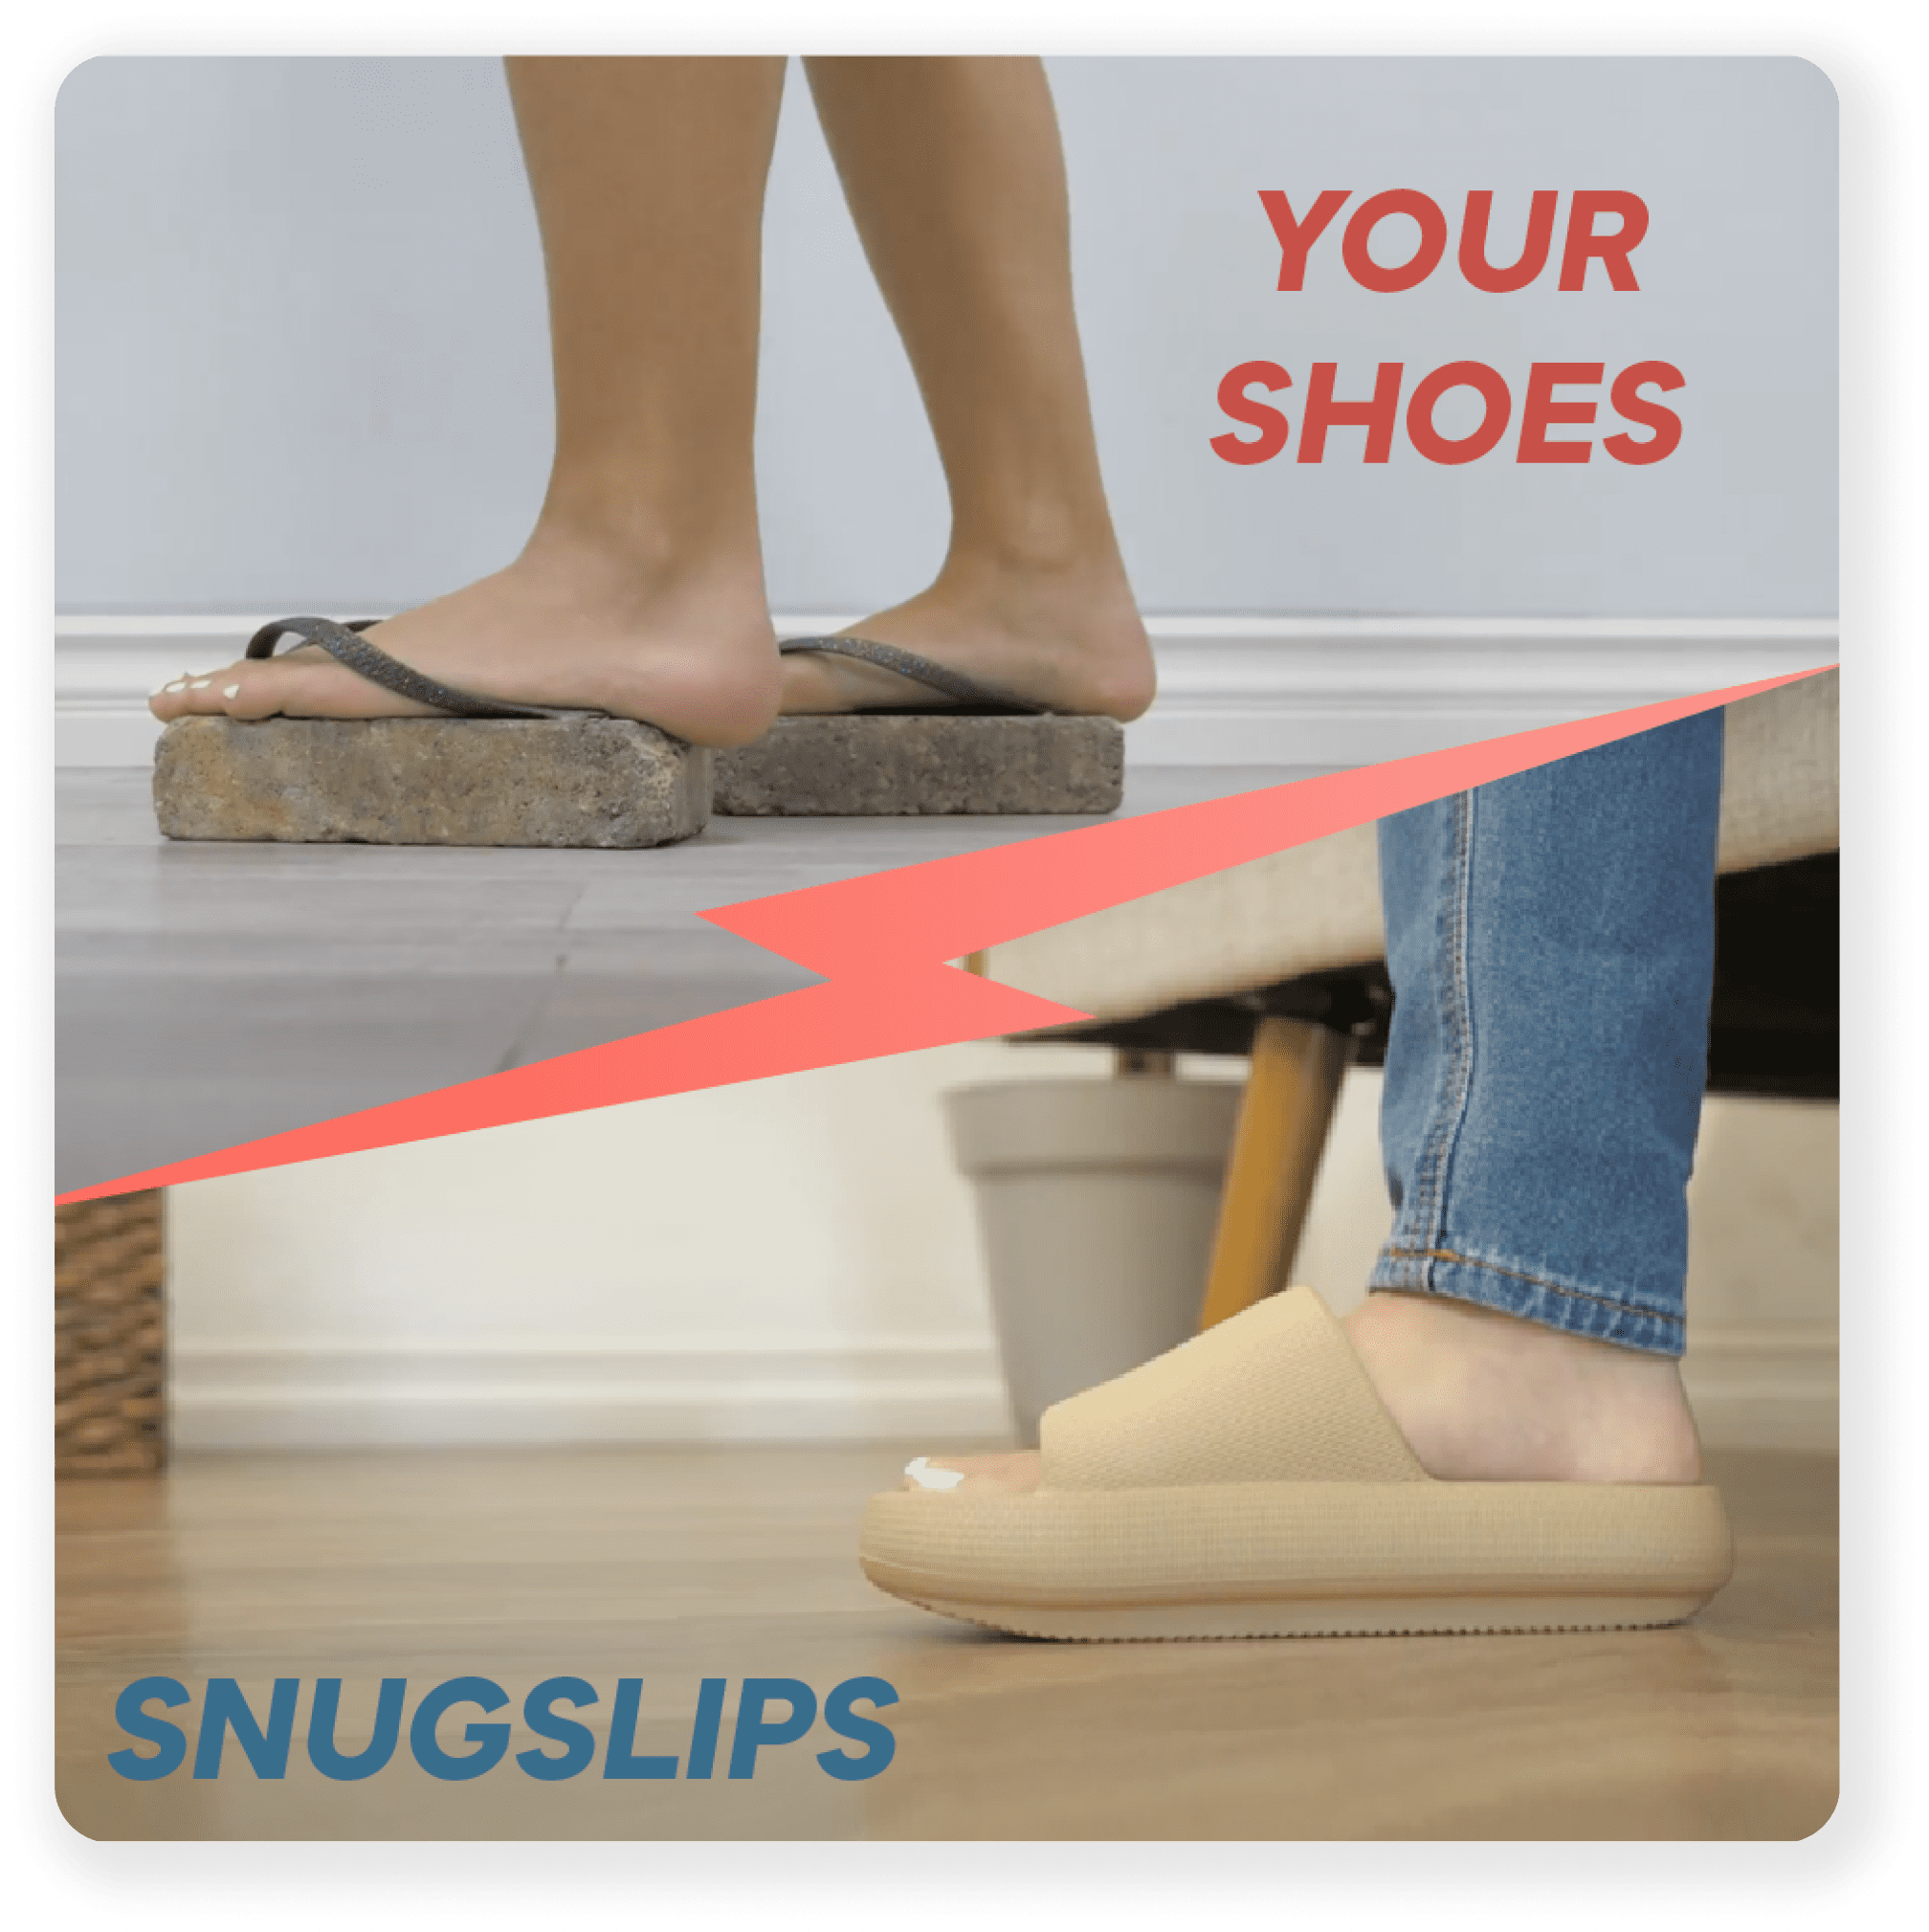 Slipper’s advertising featuring benefits of comfort